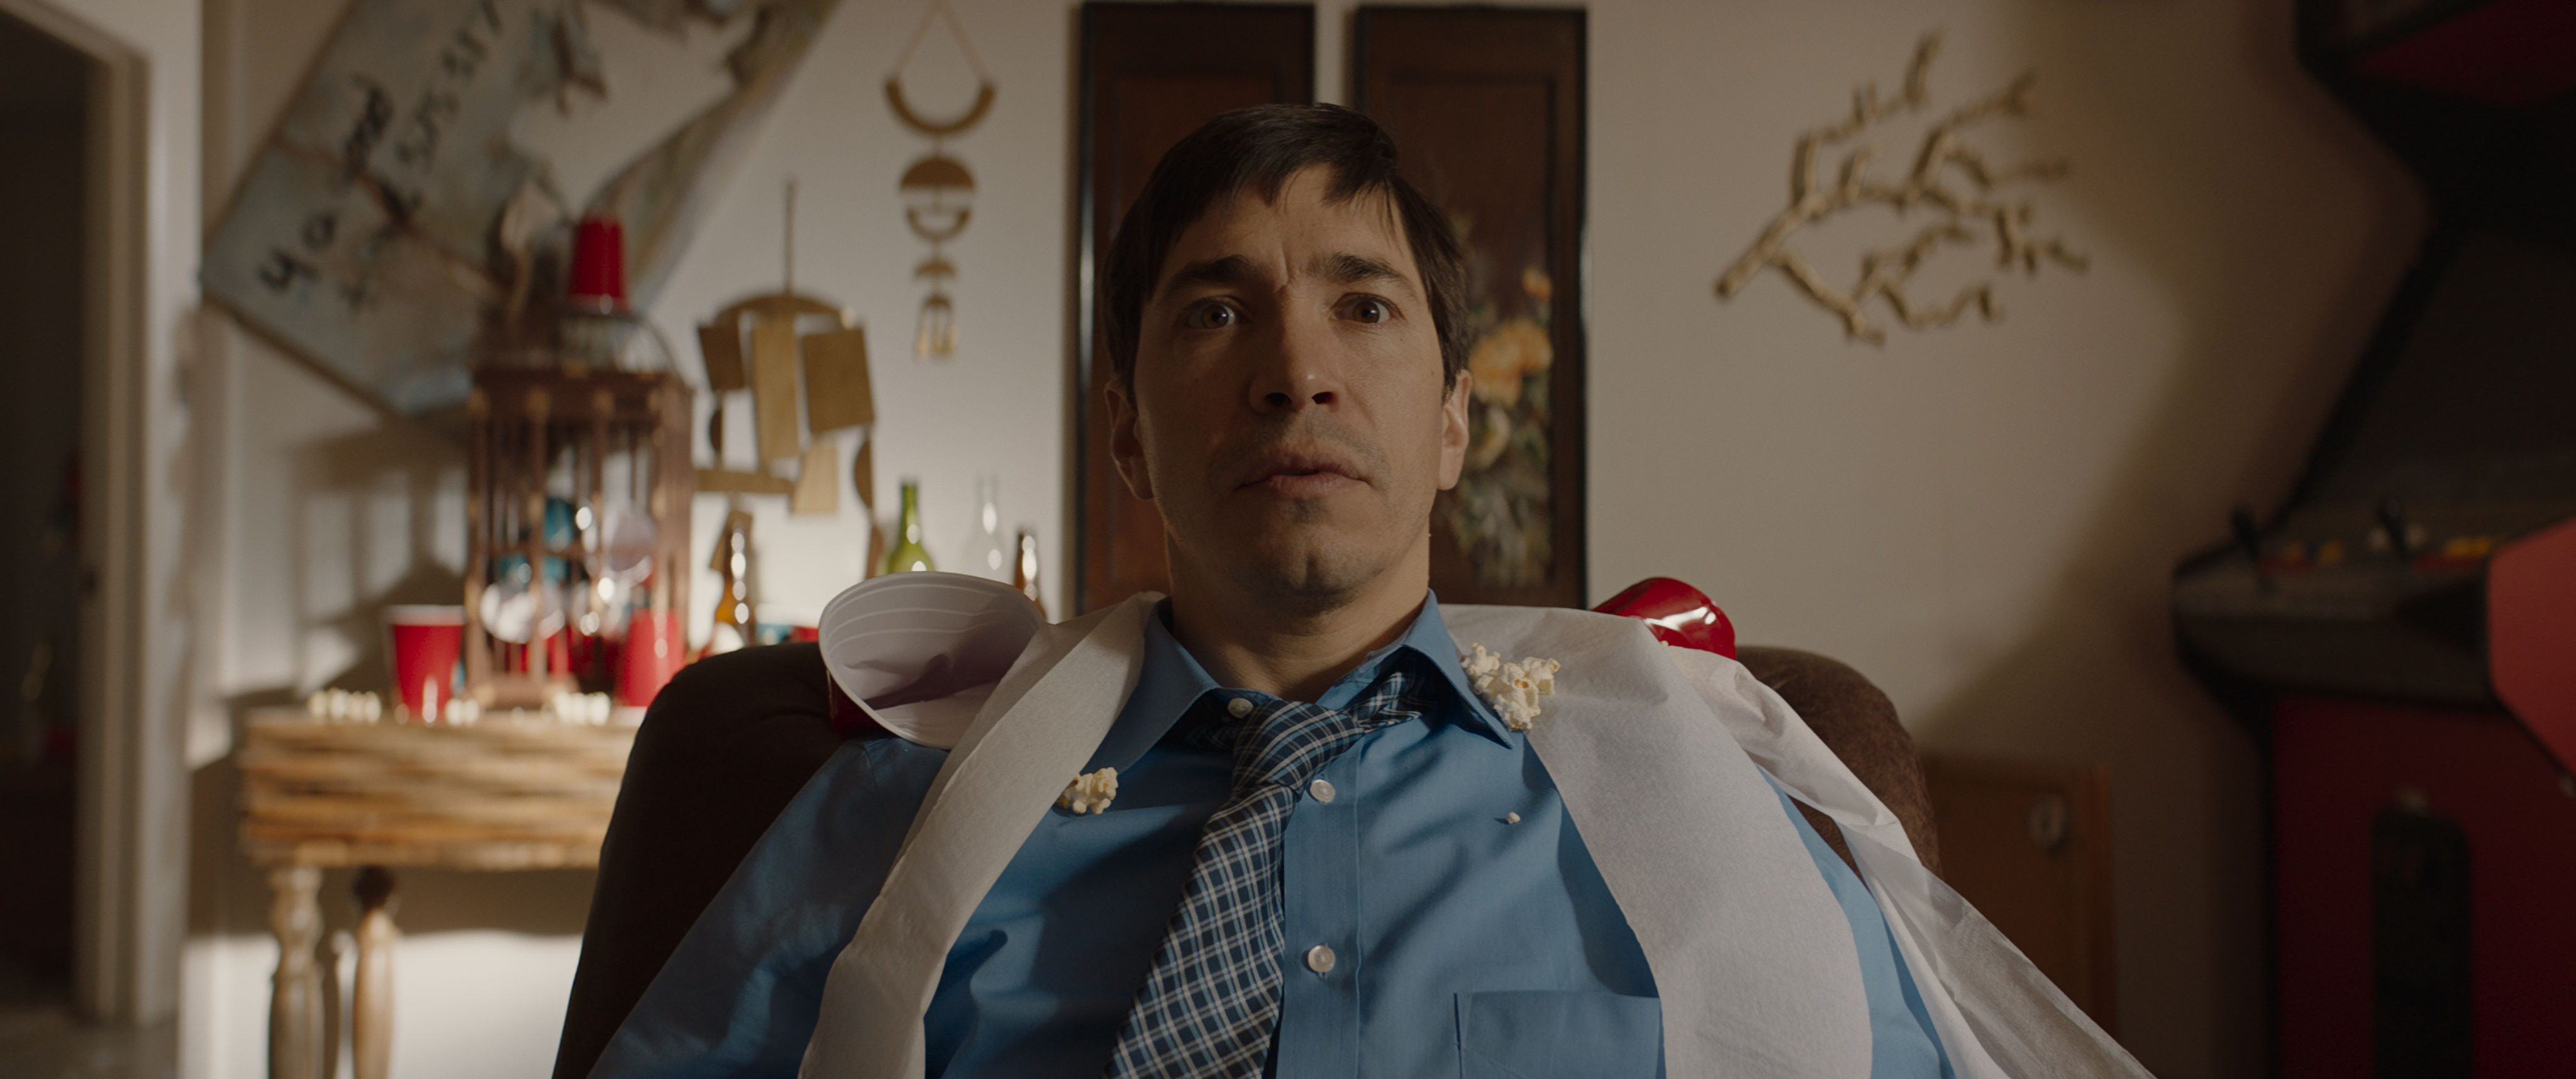 Justin Long is making his directorial debut after his trippy new movie ...